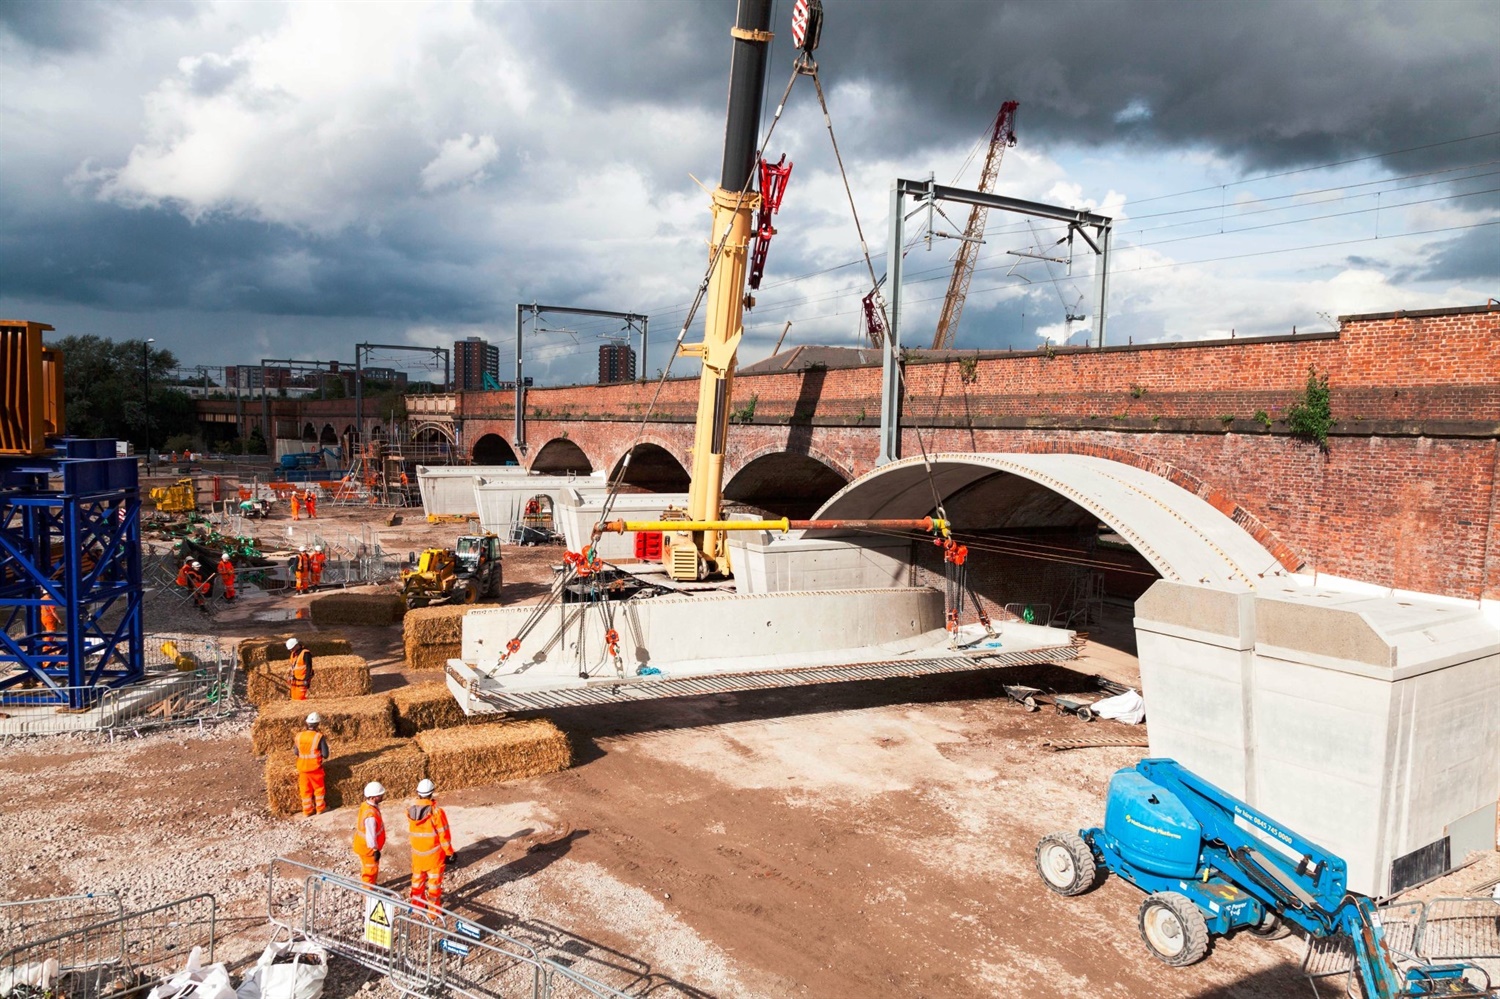 NR promises Manchester airport services via Ordsall Chord by end of 2017